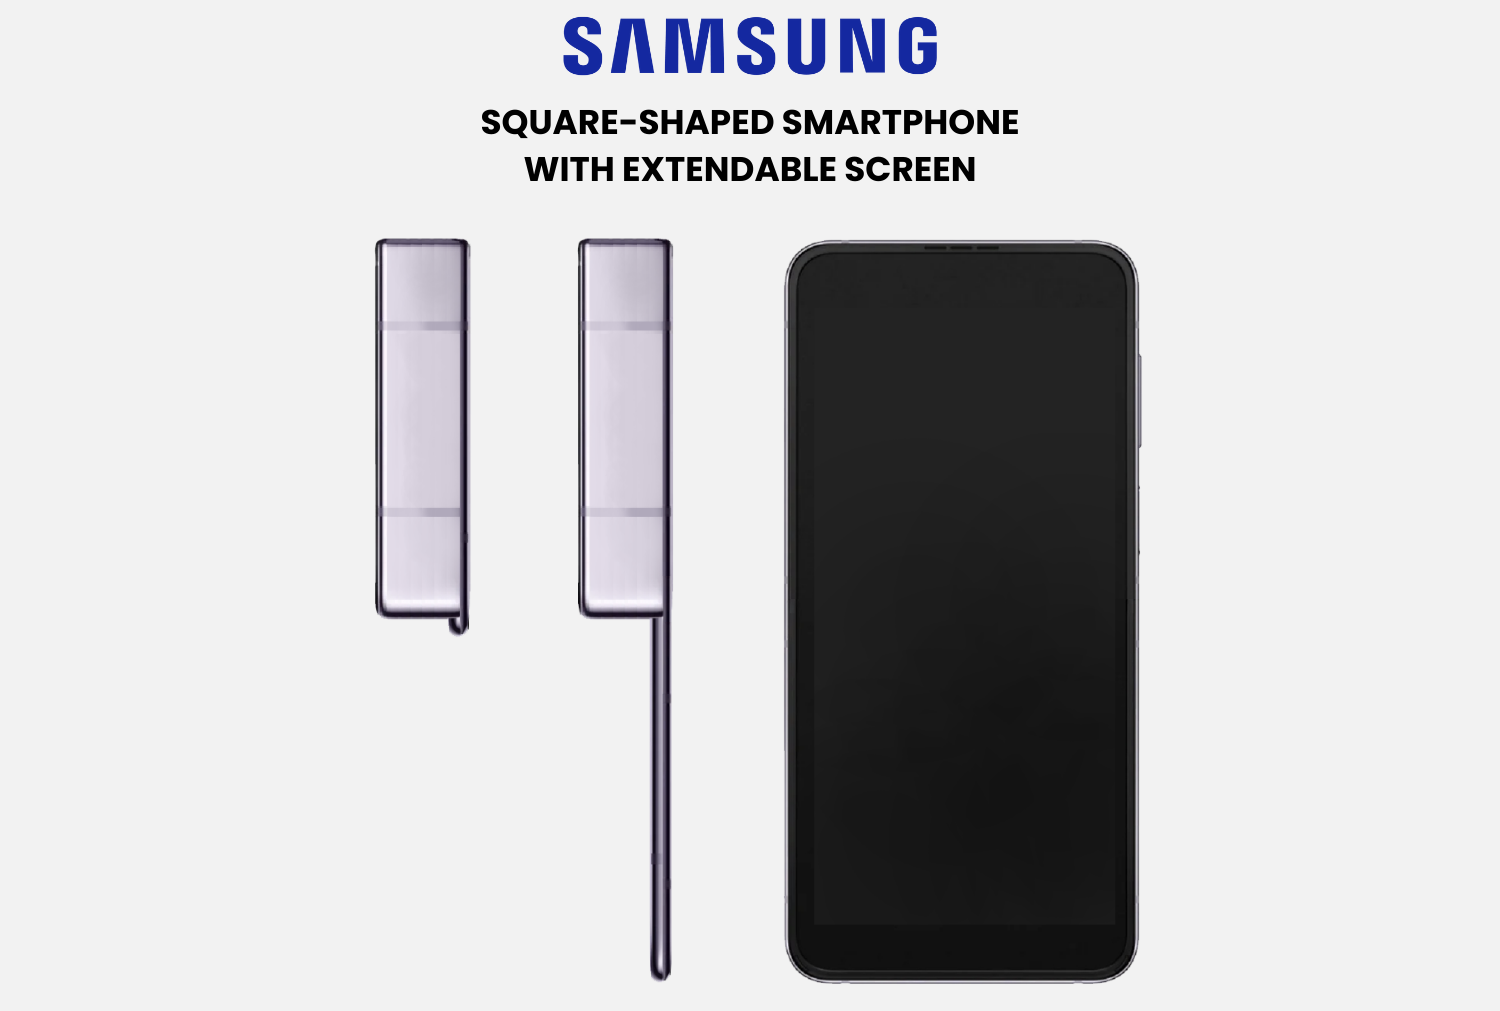 Samsung extendable display patent 2